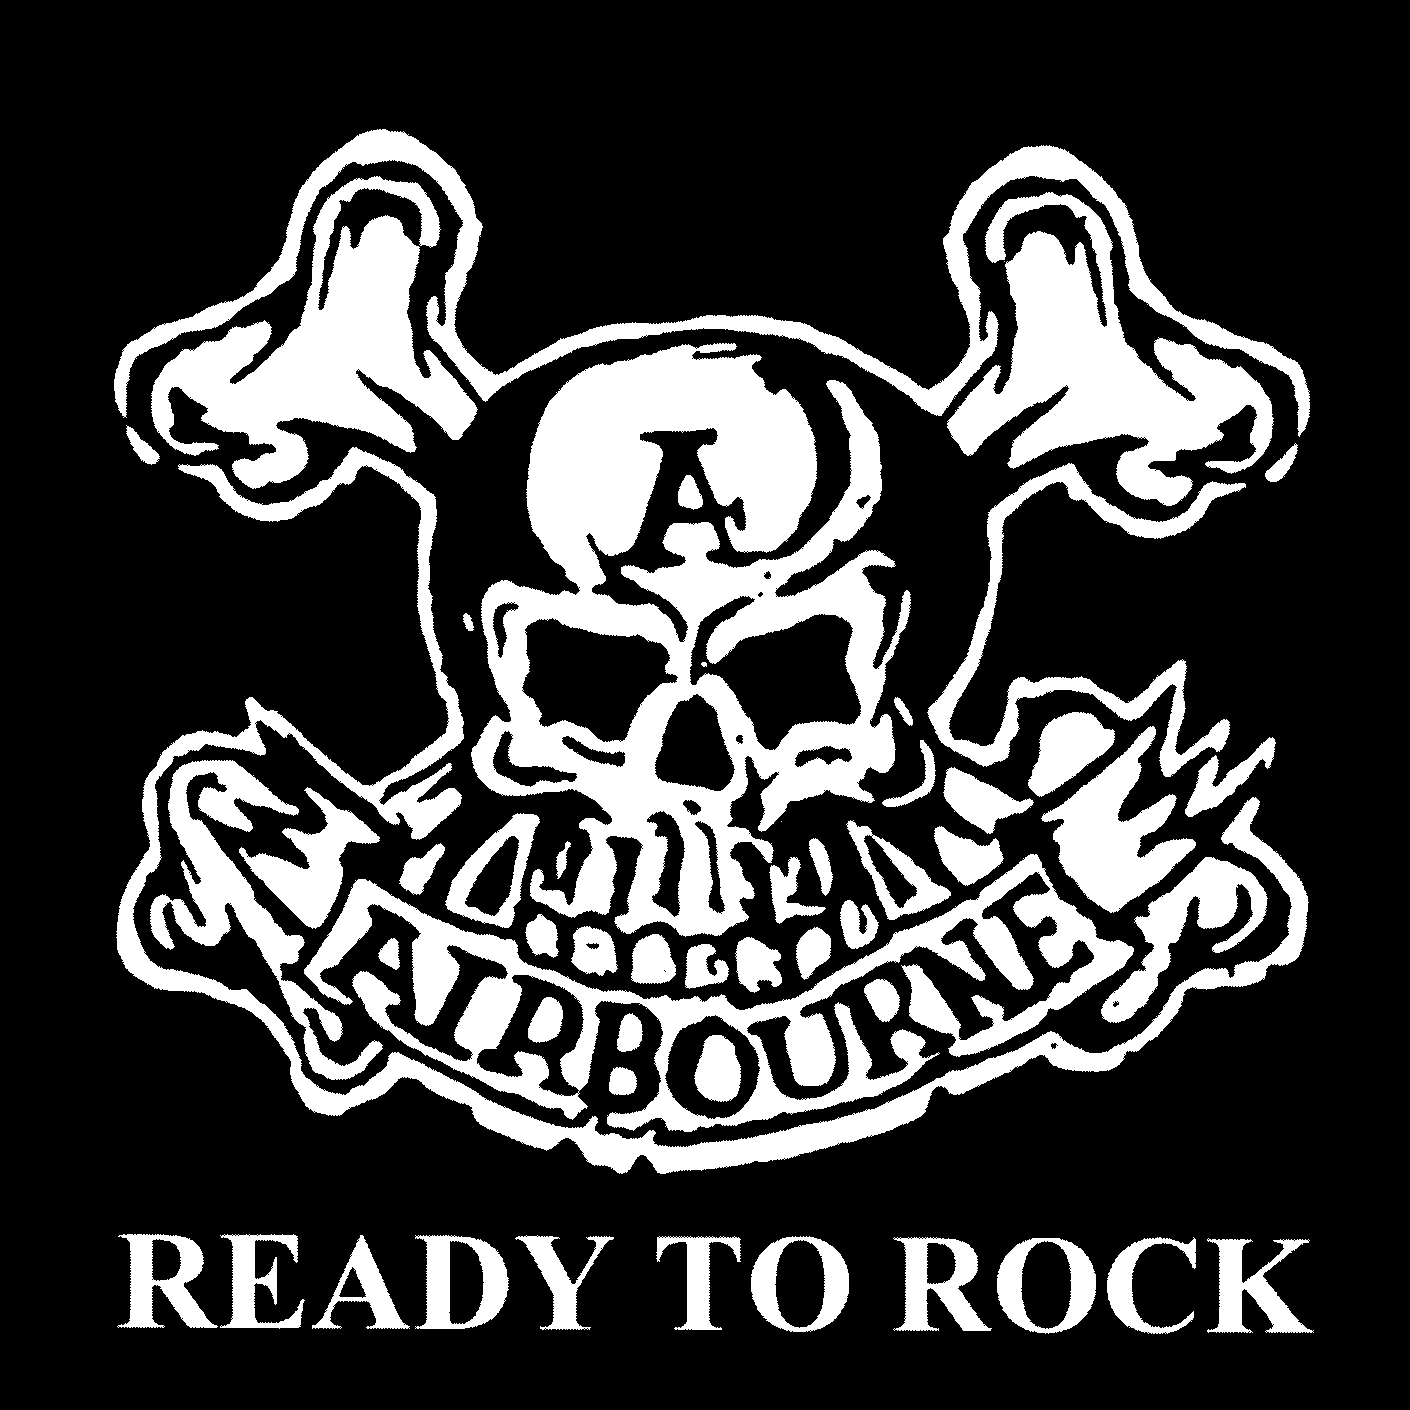 AIRBOURNE - Ready To Rock cover 